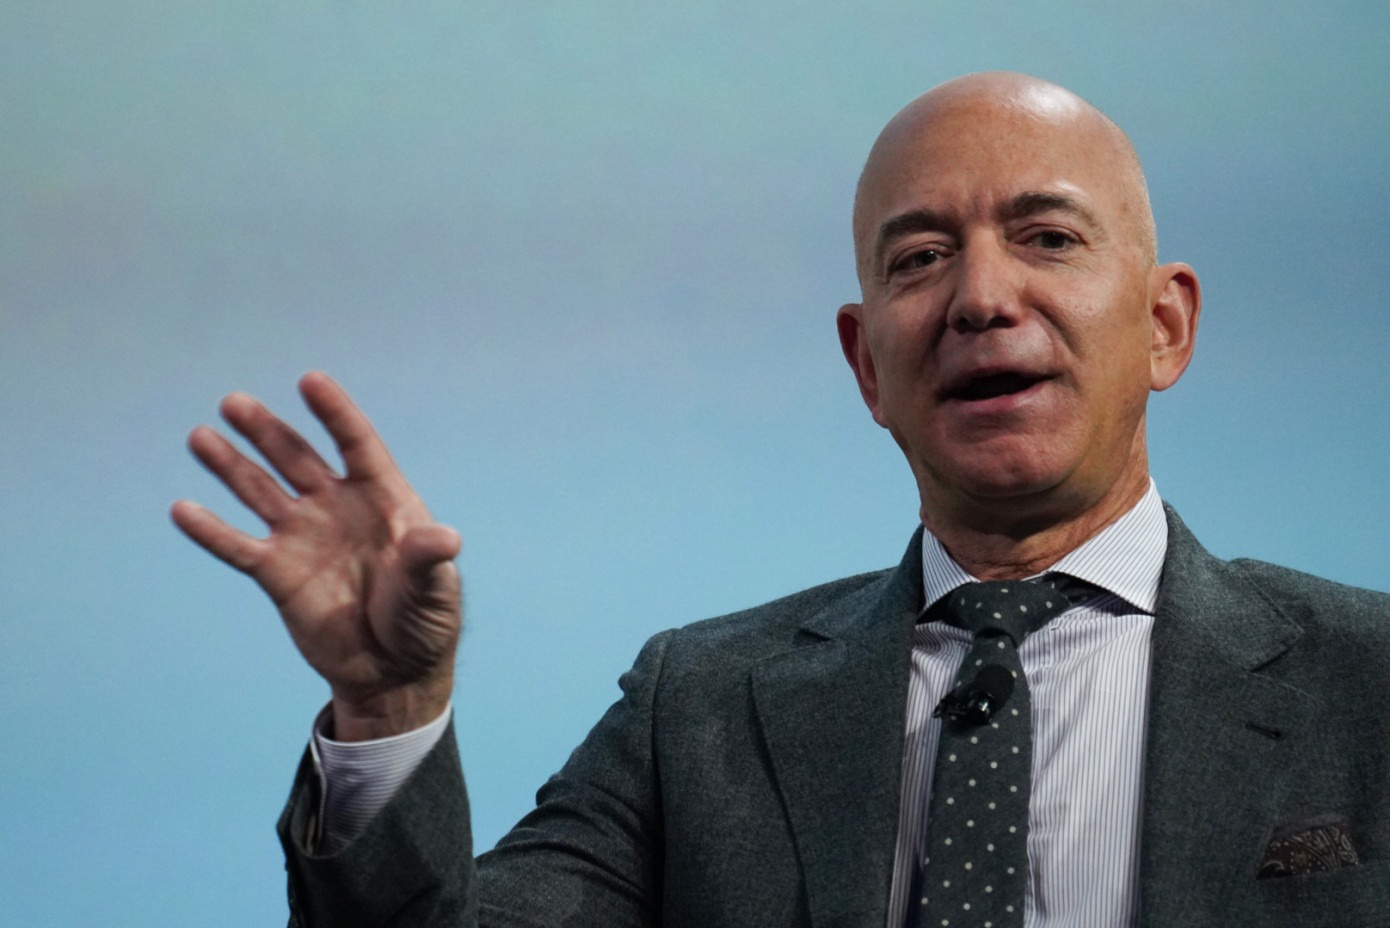 Jeff Bezos Announced a $10 Billion Fund to Fight Climate Change